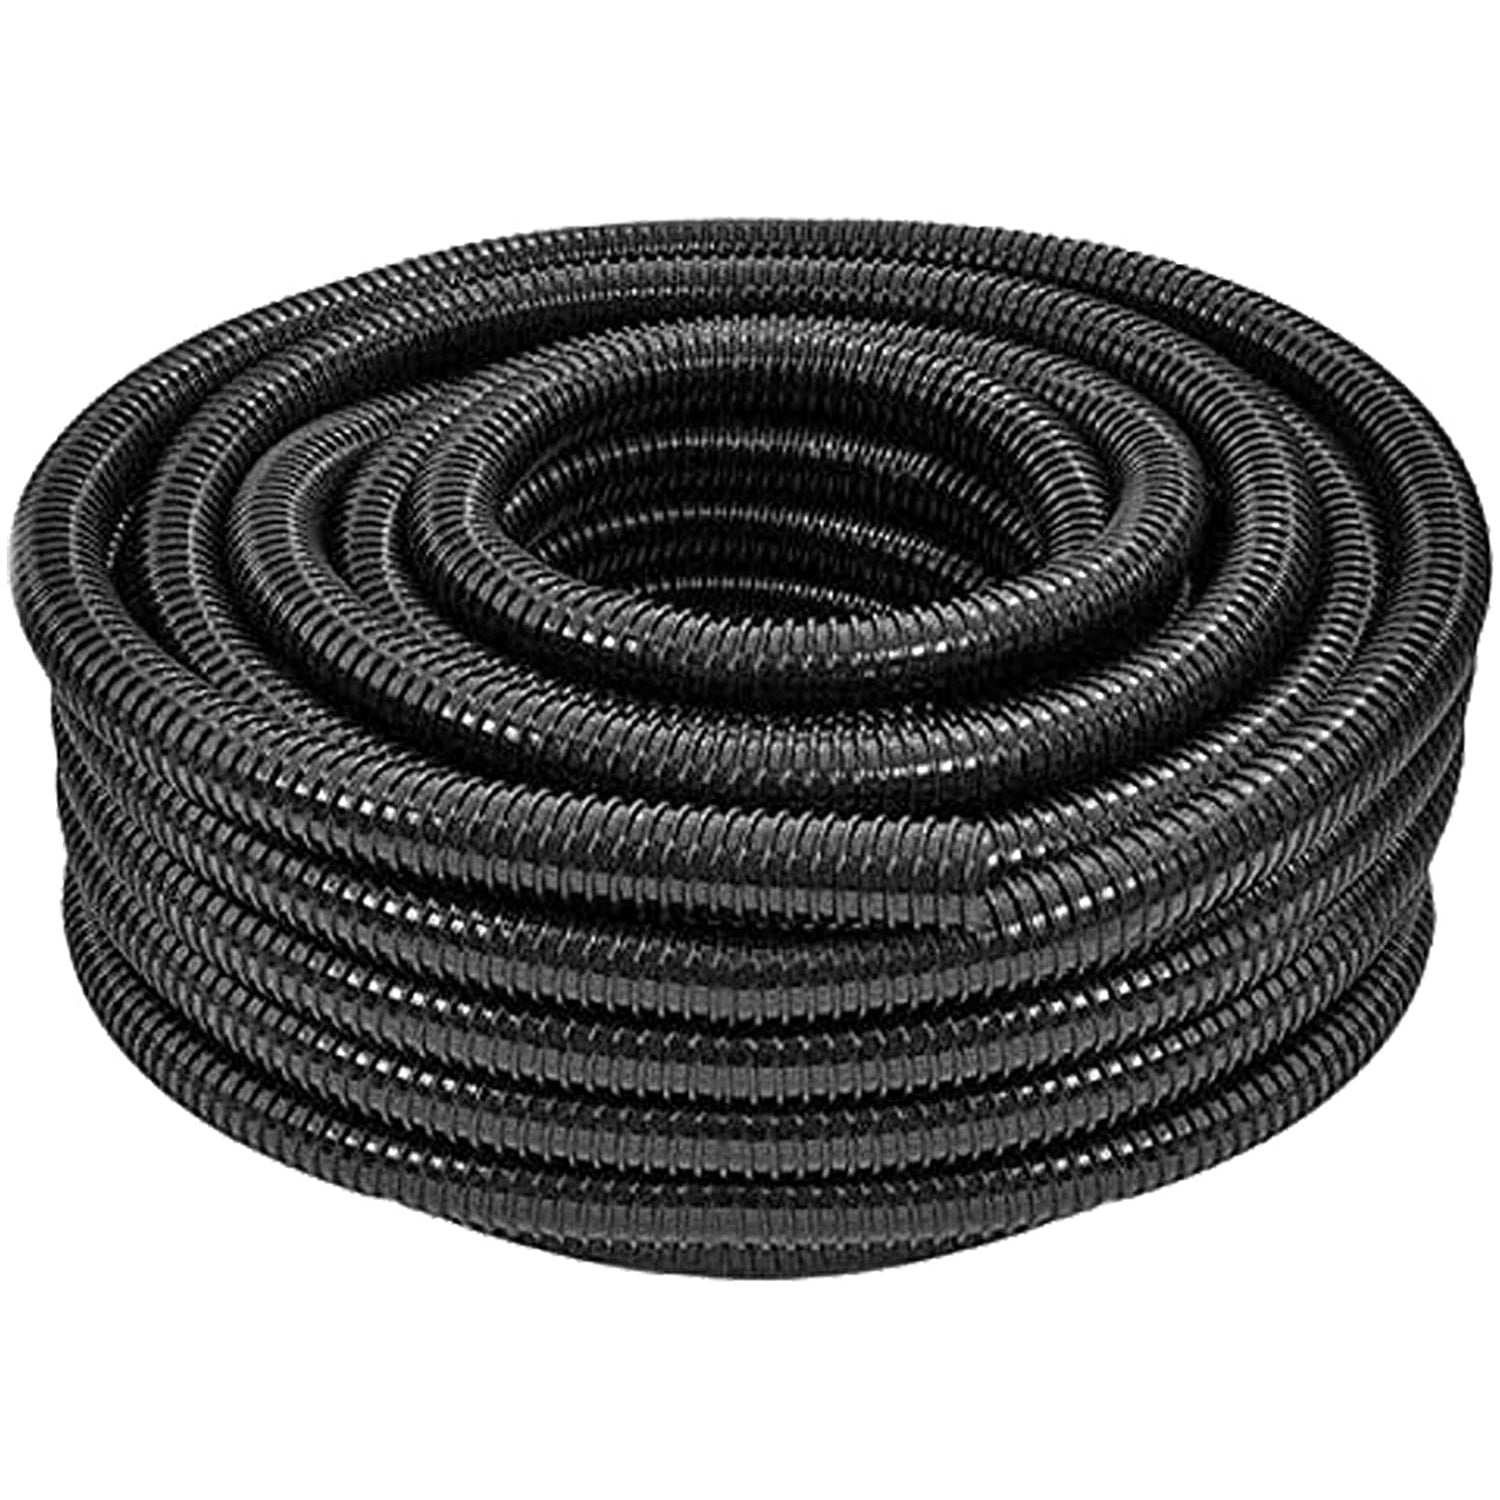 Swimming Pool Jacuzzi Pump Hose Filter Corrugated Pipe Tube (25mm, 5m)